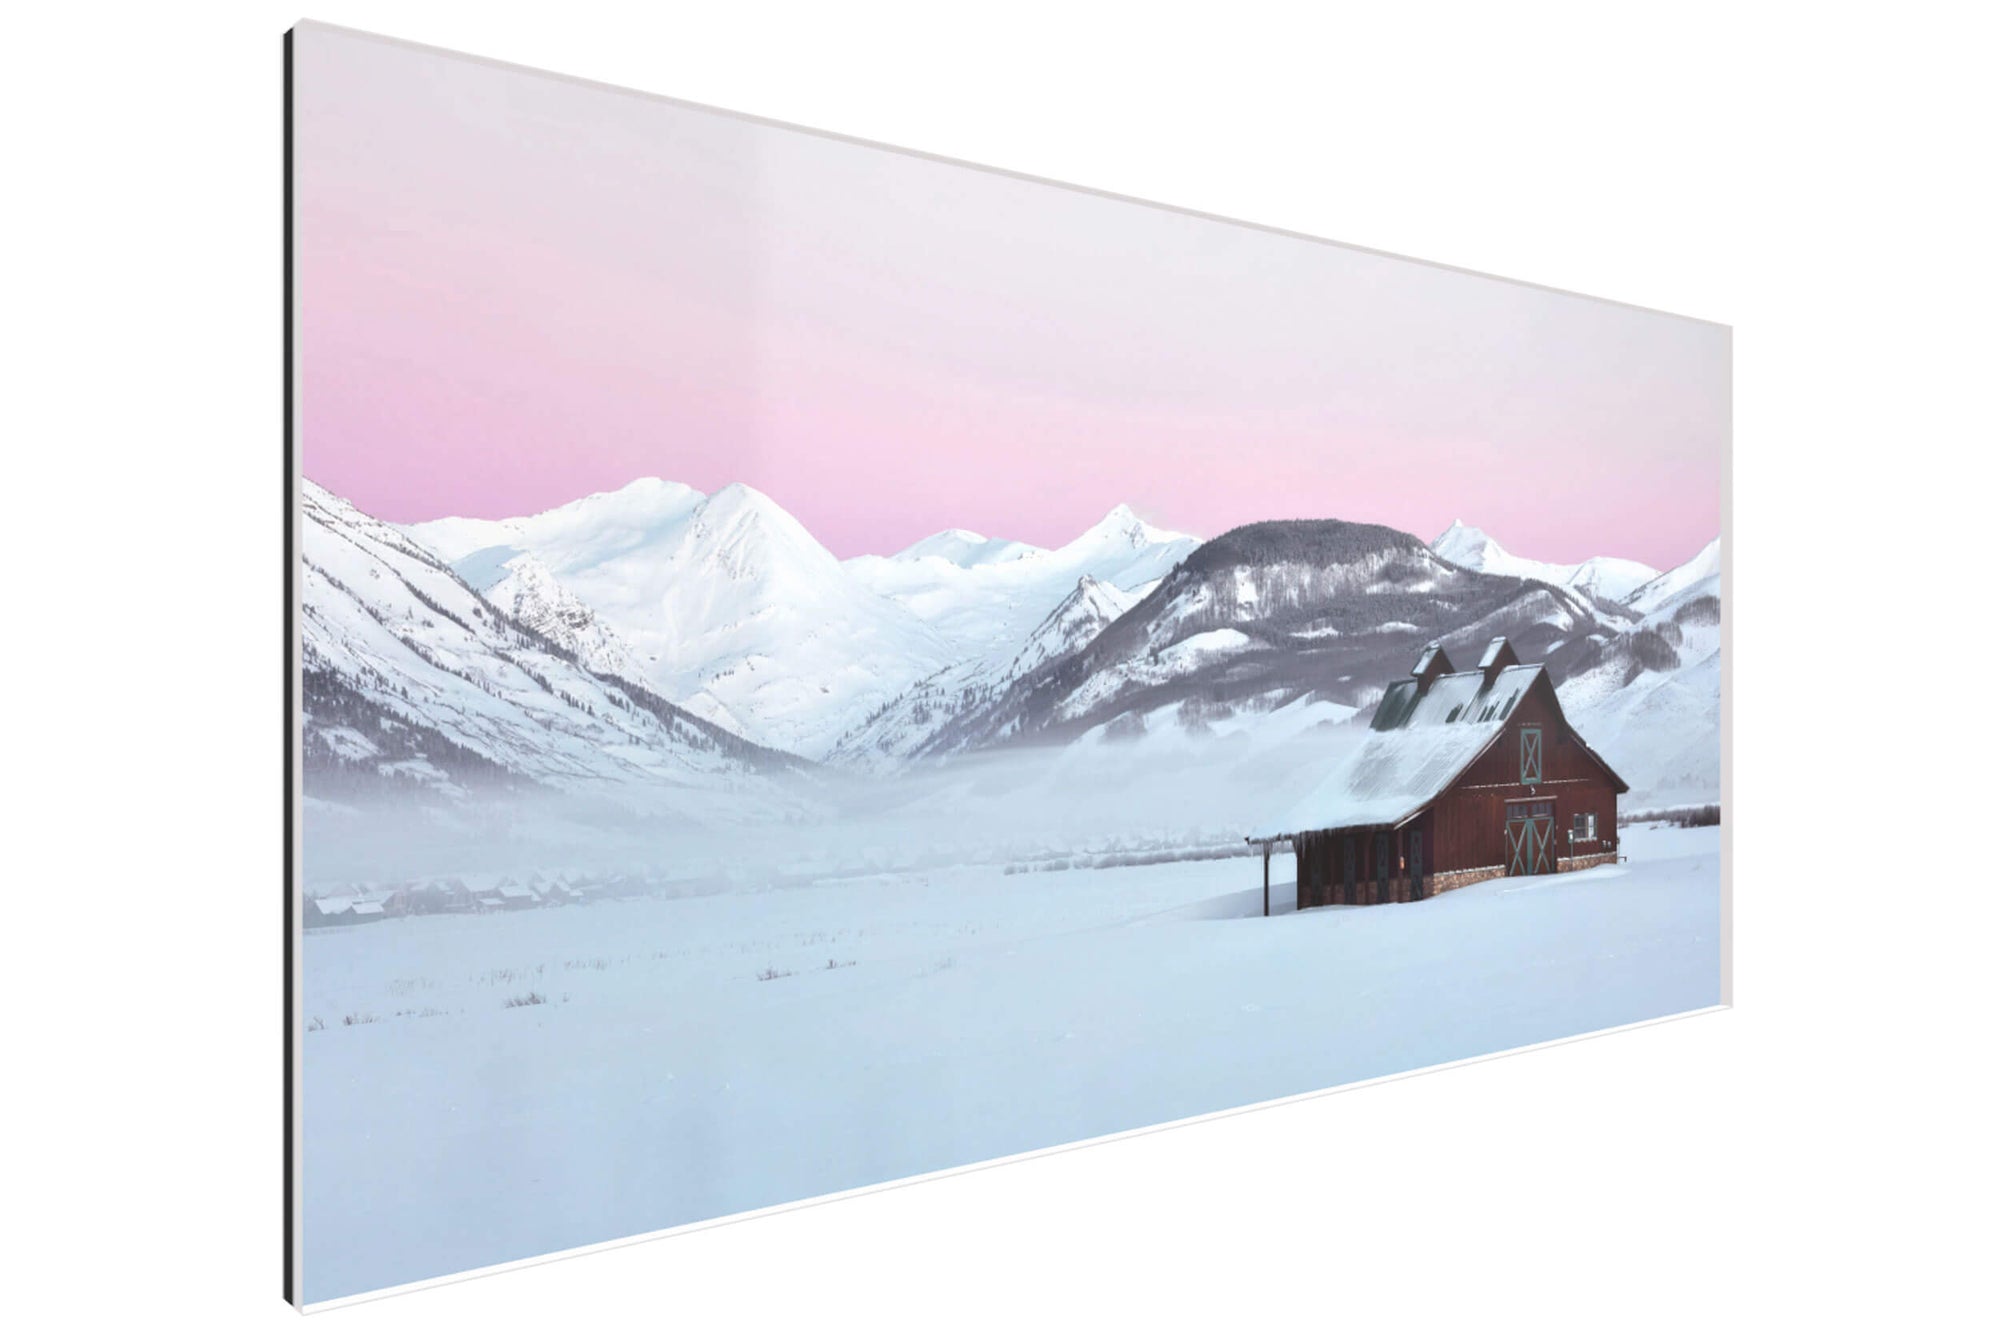 A TruLife acrylic Crested Butte winter picture created at sunrise.